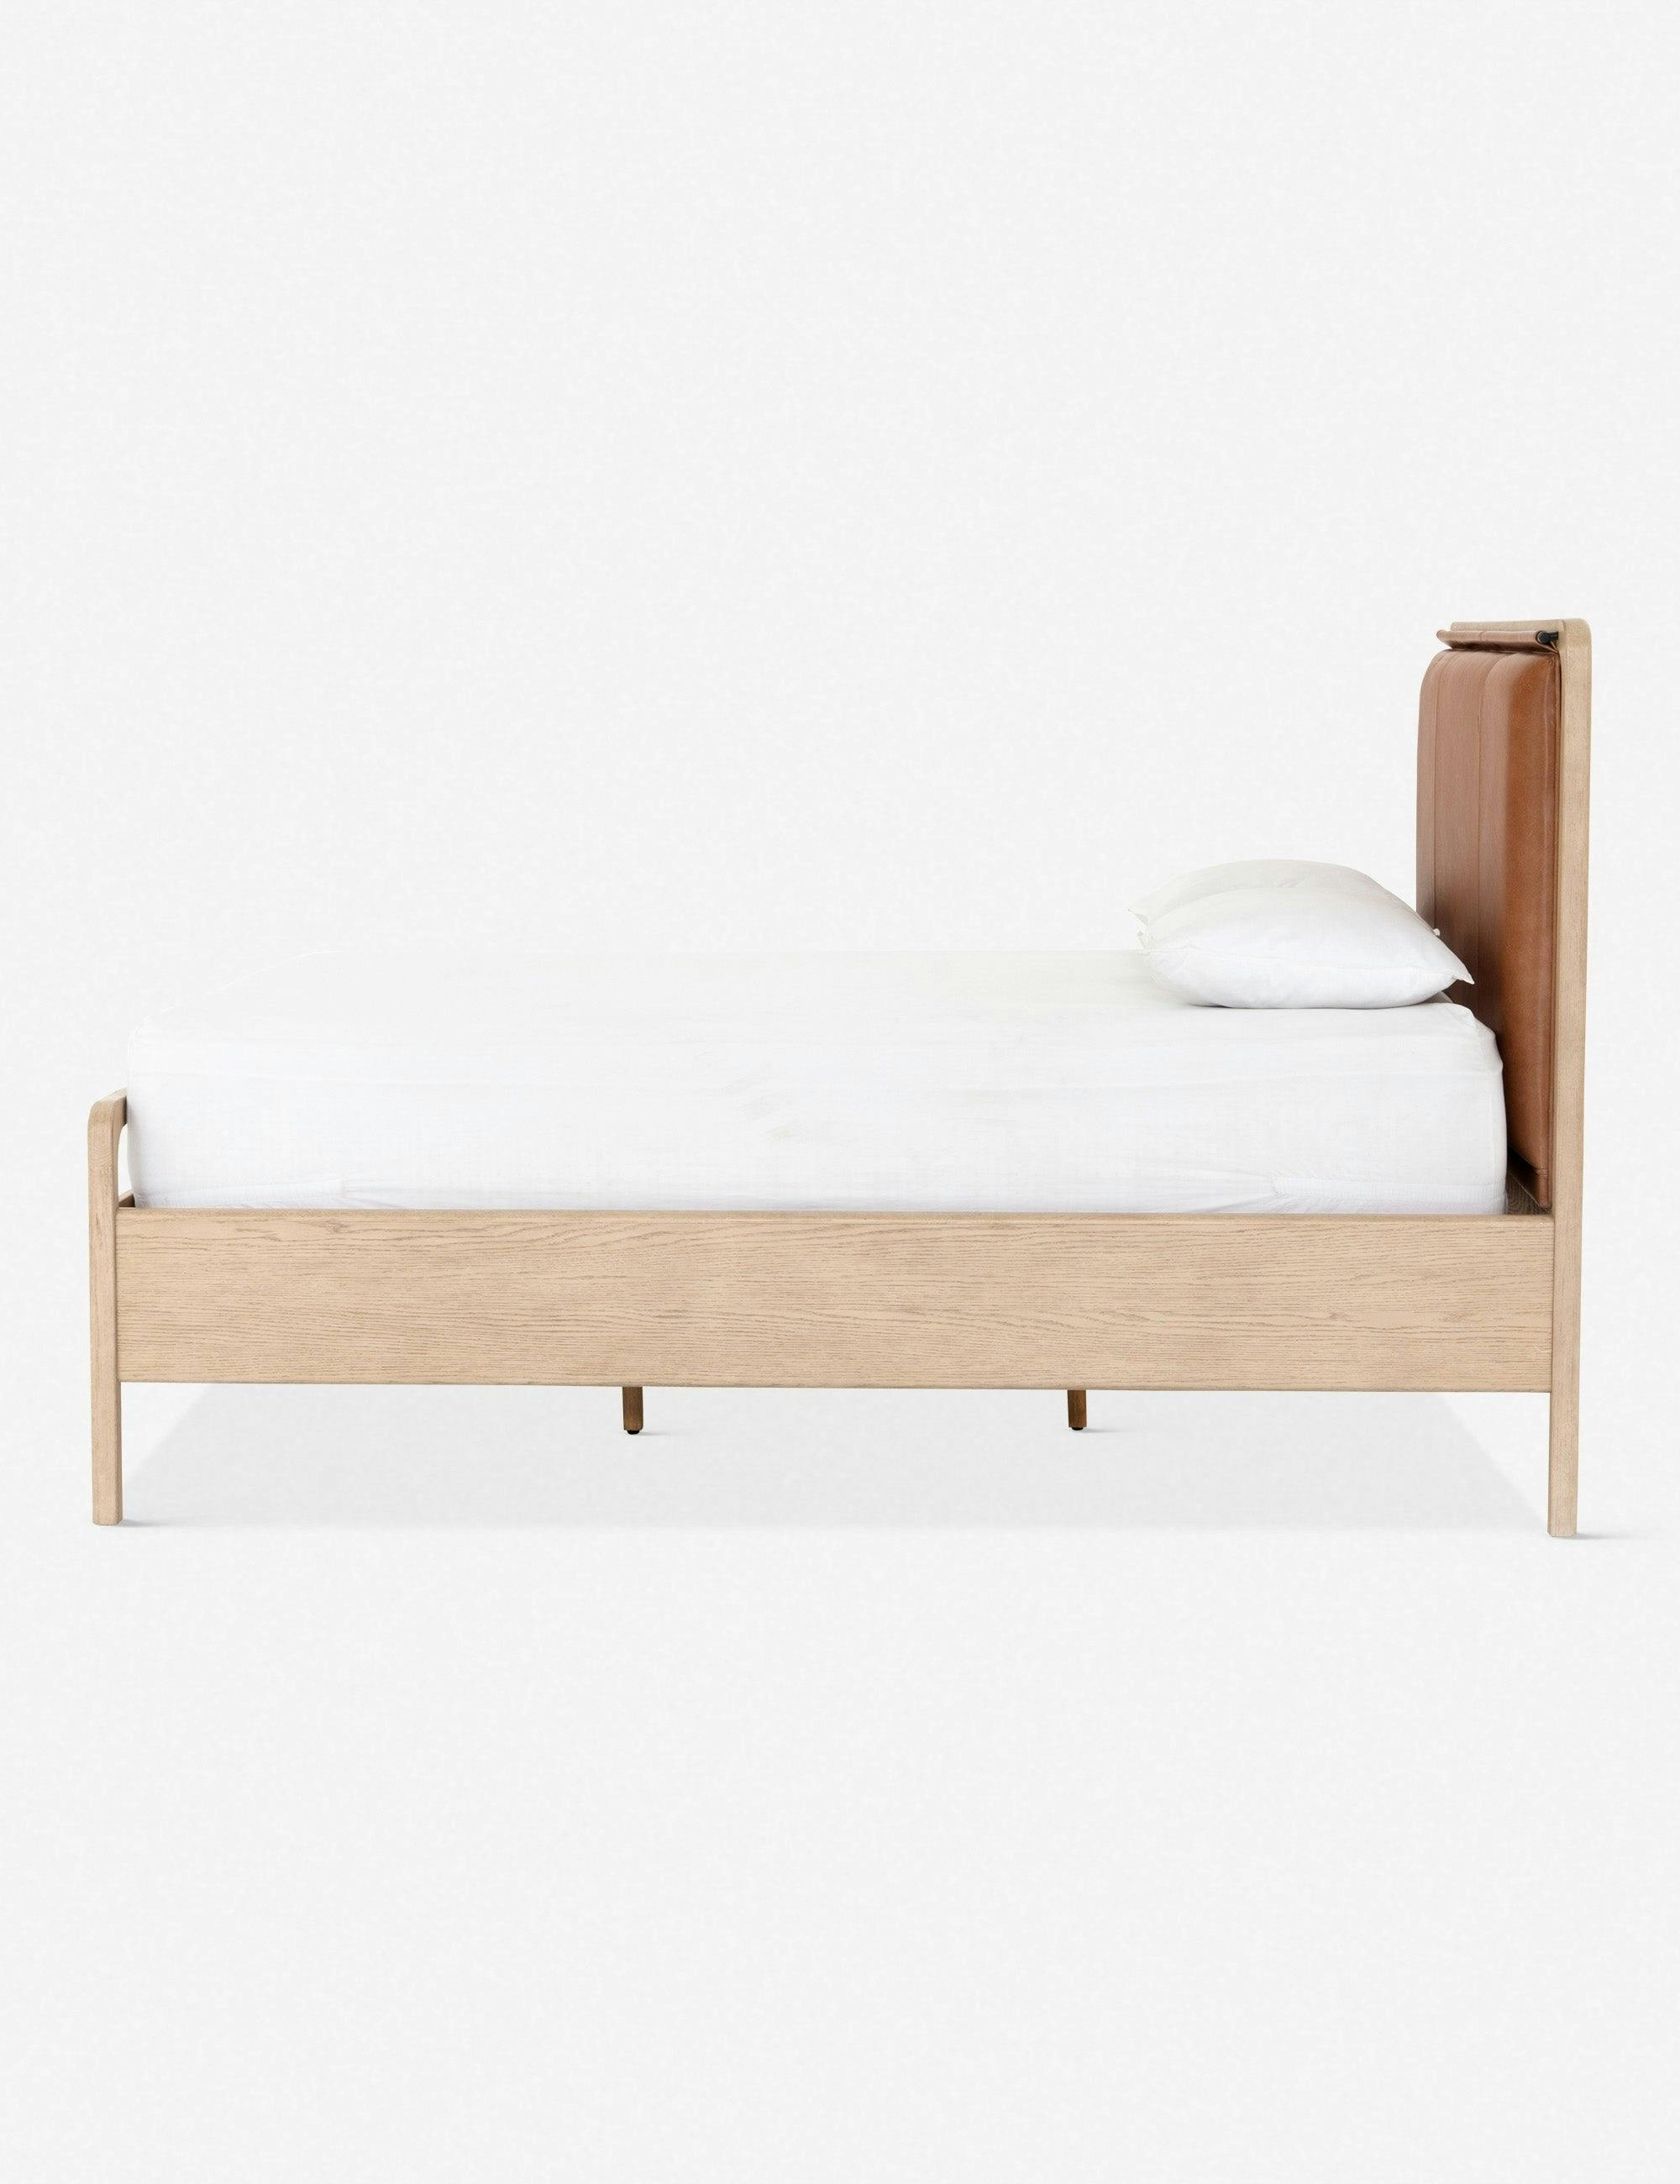 Modern Washed Oak King Bed with Tan Leather Headboard